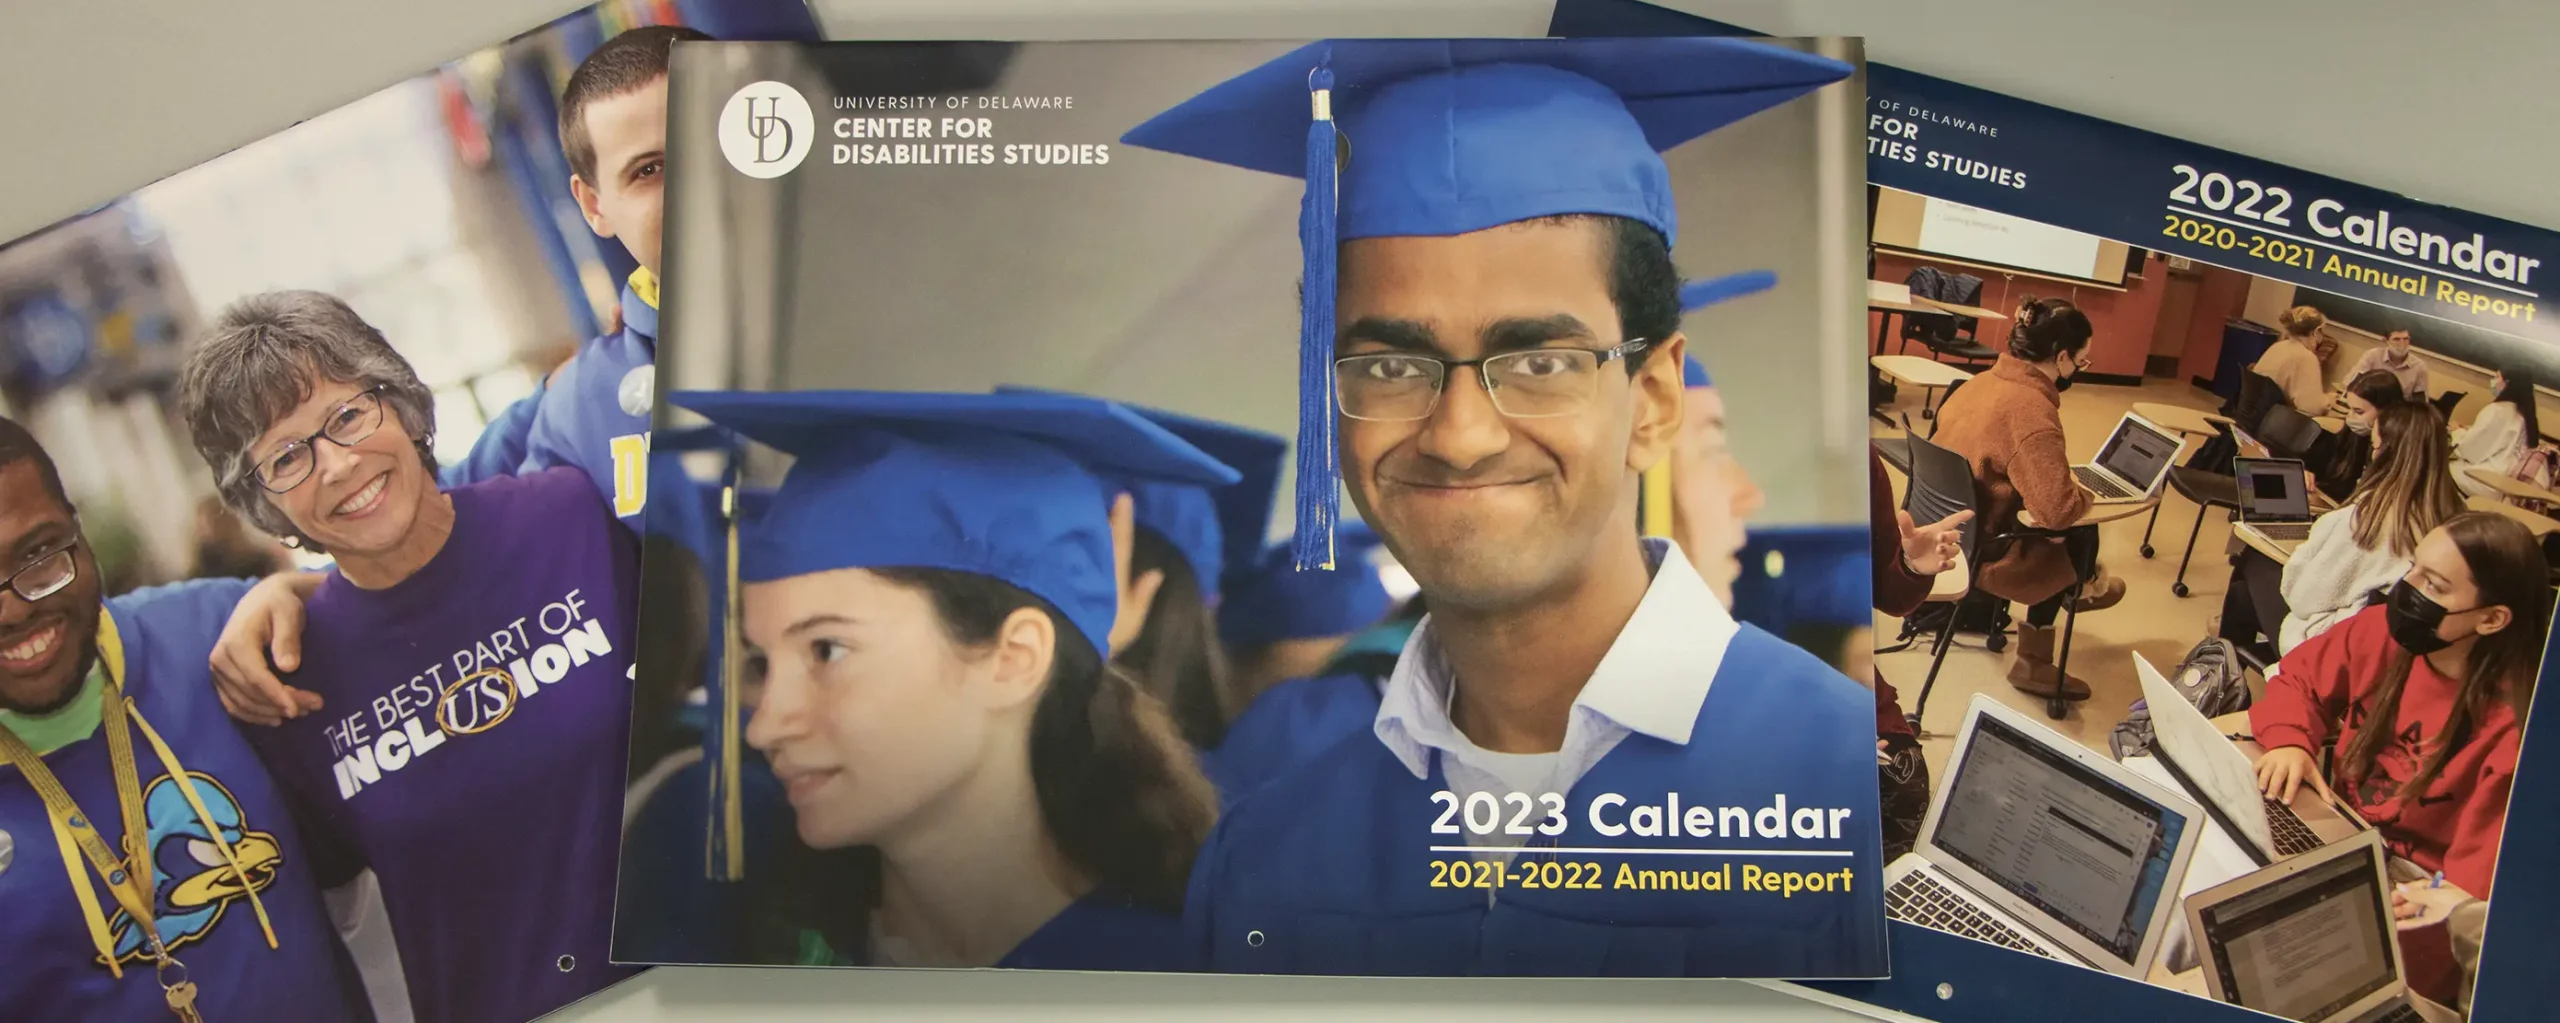 The 2021, 2022 and 2023 CDS annual report calendars on a desktop.